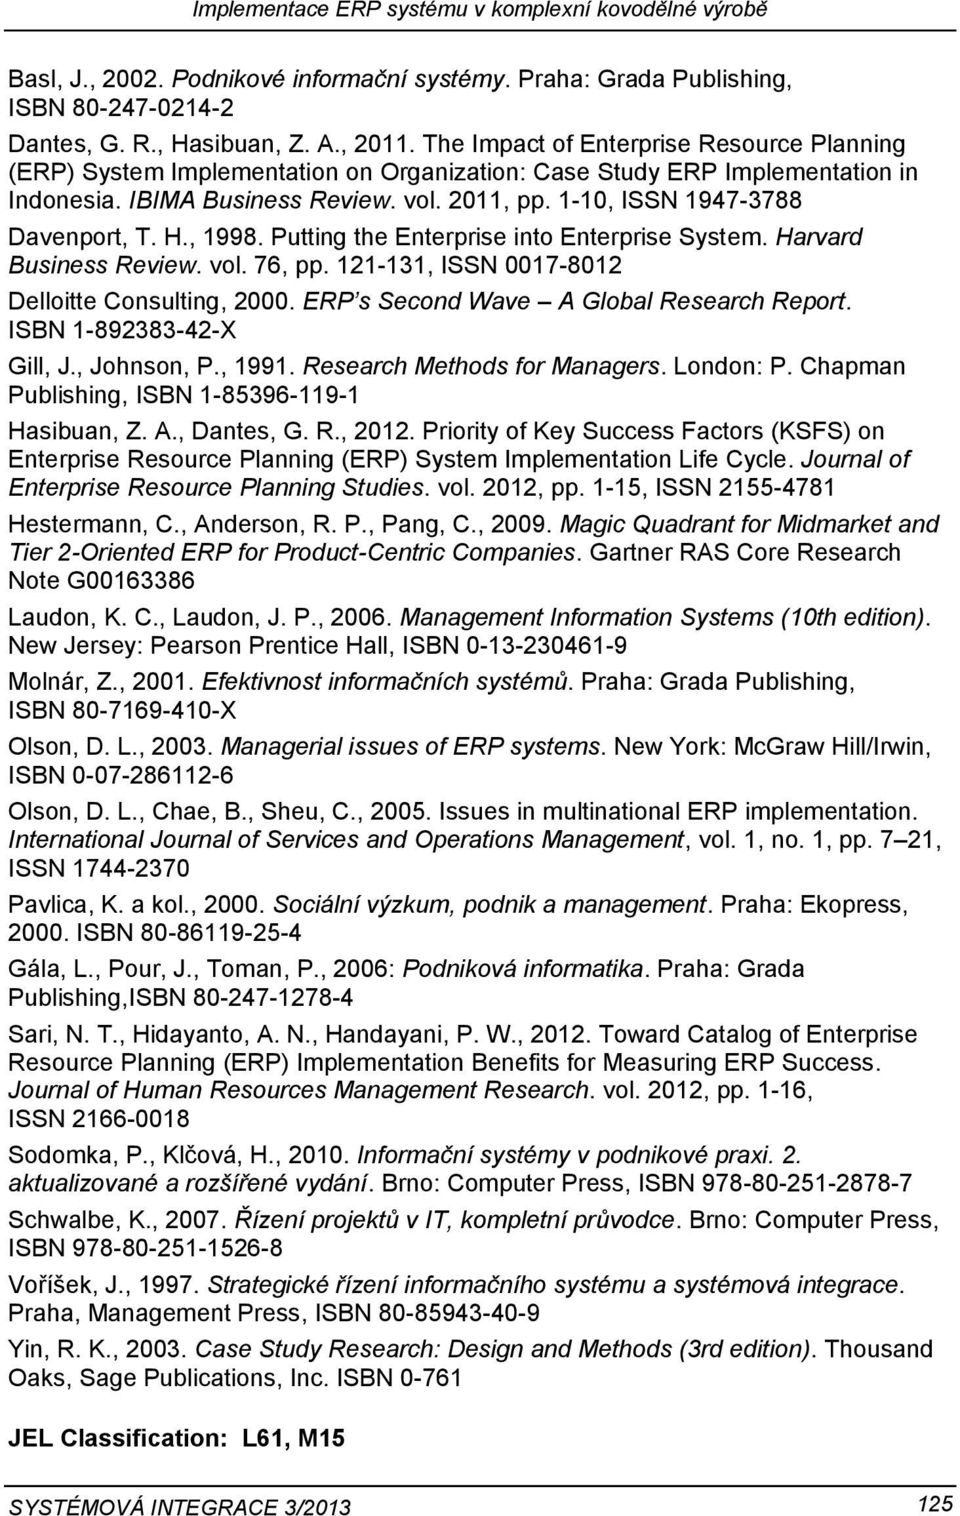 1-10, ISSN 1947-3788 Davenport, T. H., 1998. Putting the Enterprise into Enterprise System. Harvard Business Review. vol. 76, pp. 121-131, ISSN 0017-8012 Delloitte Consulting, 2000.